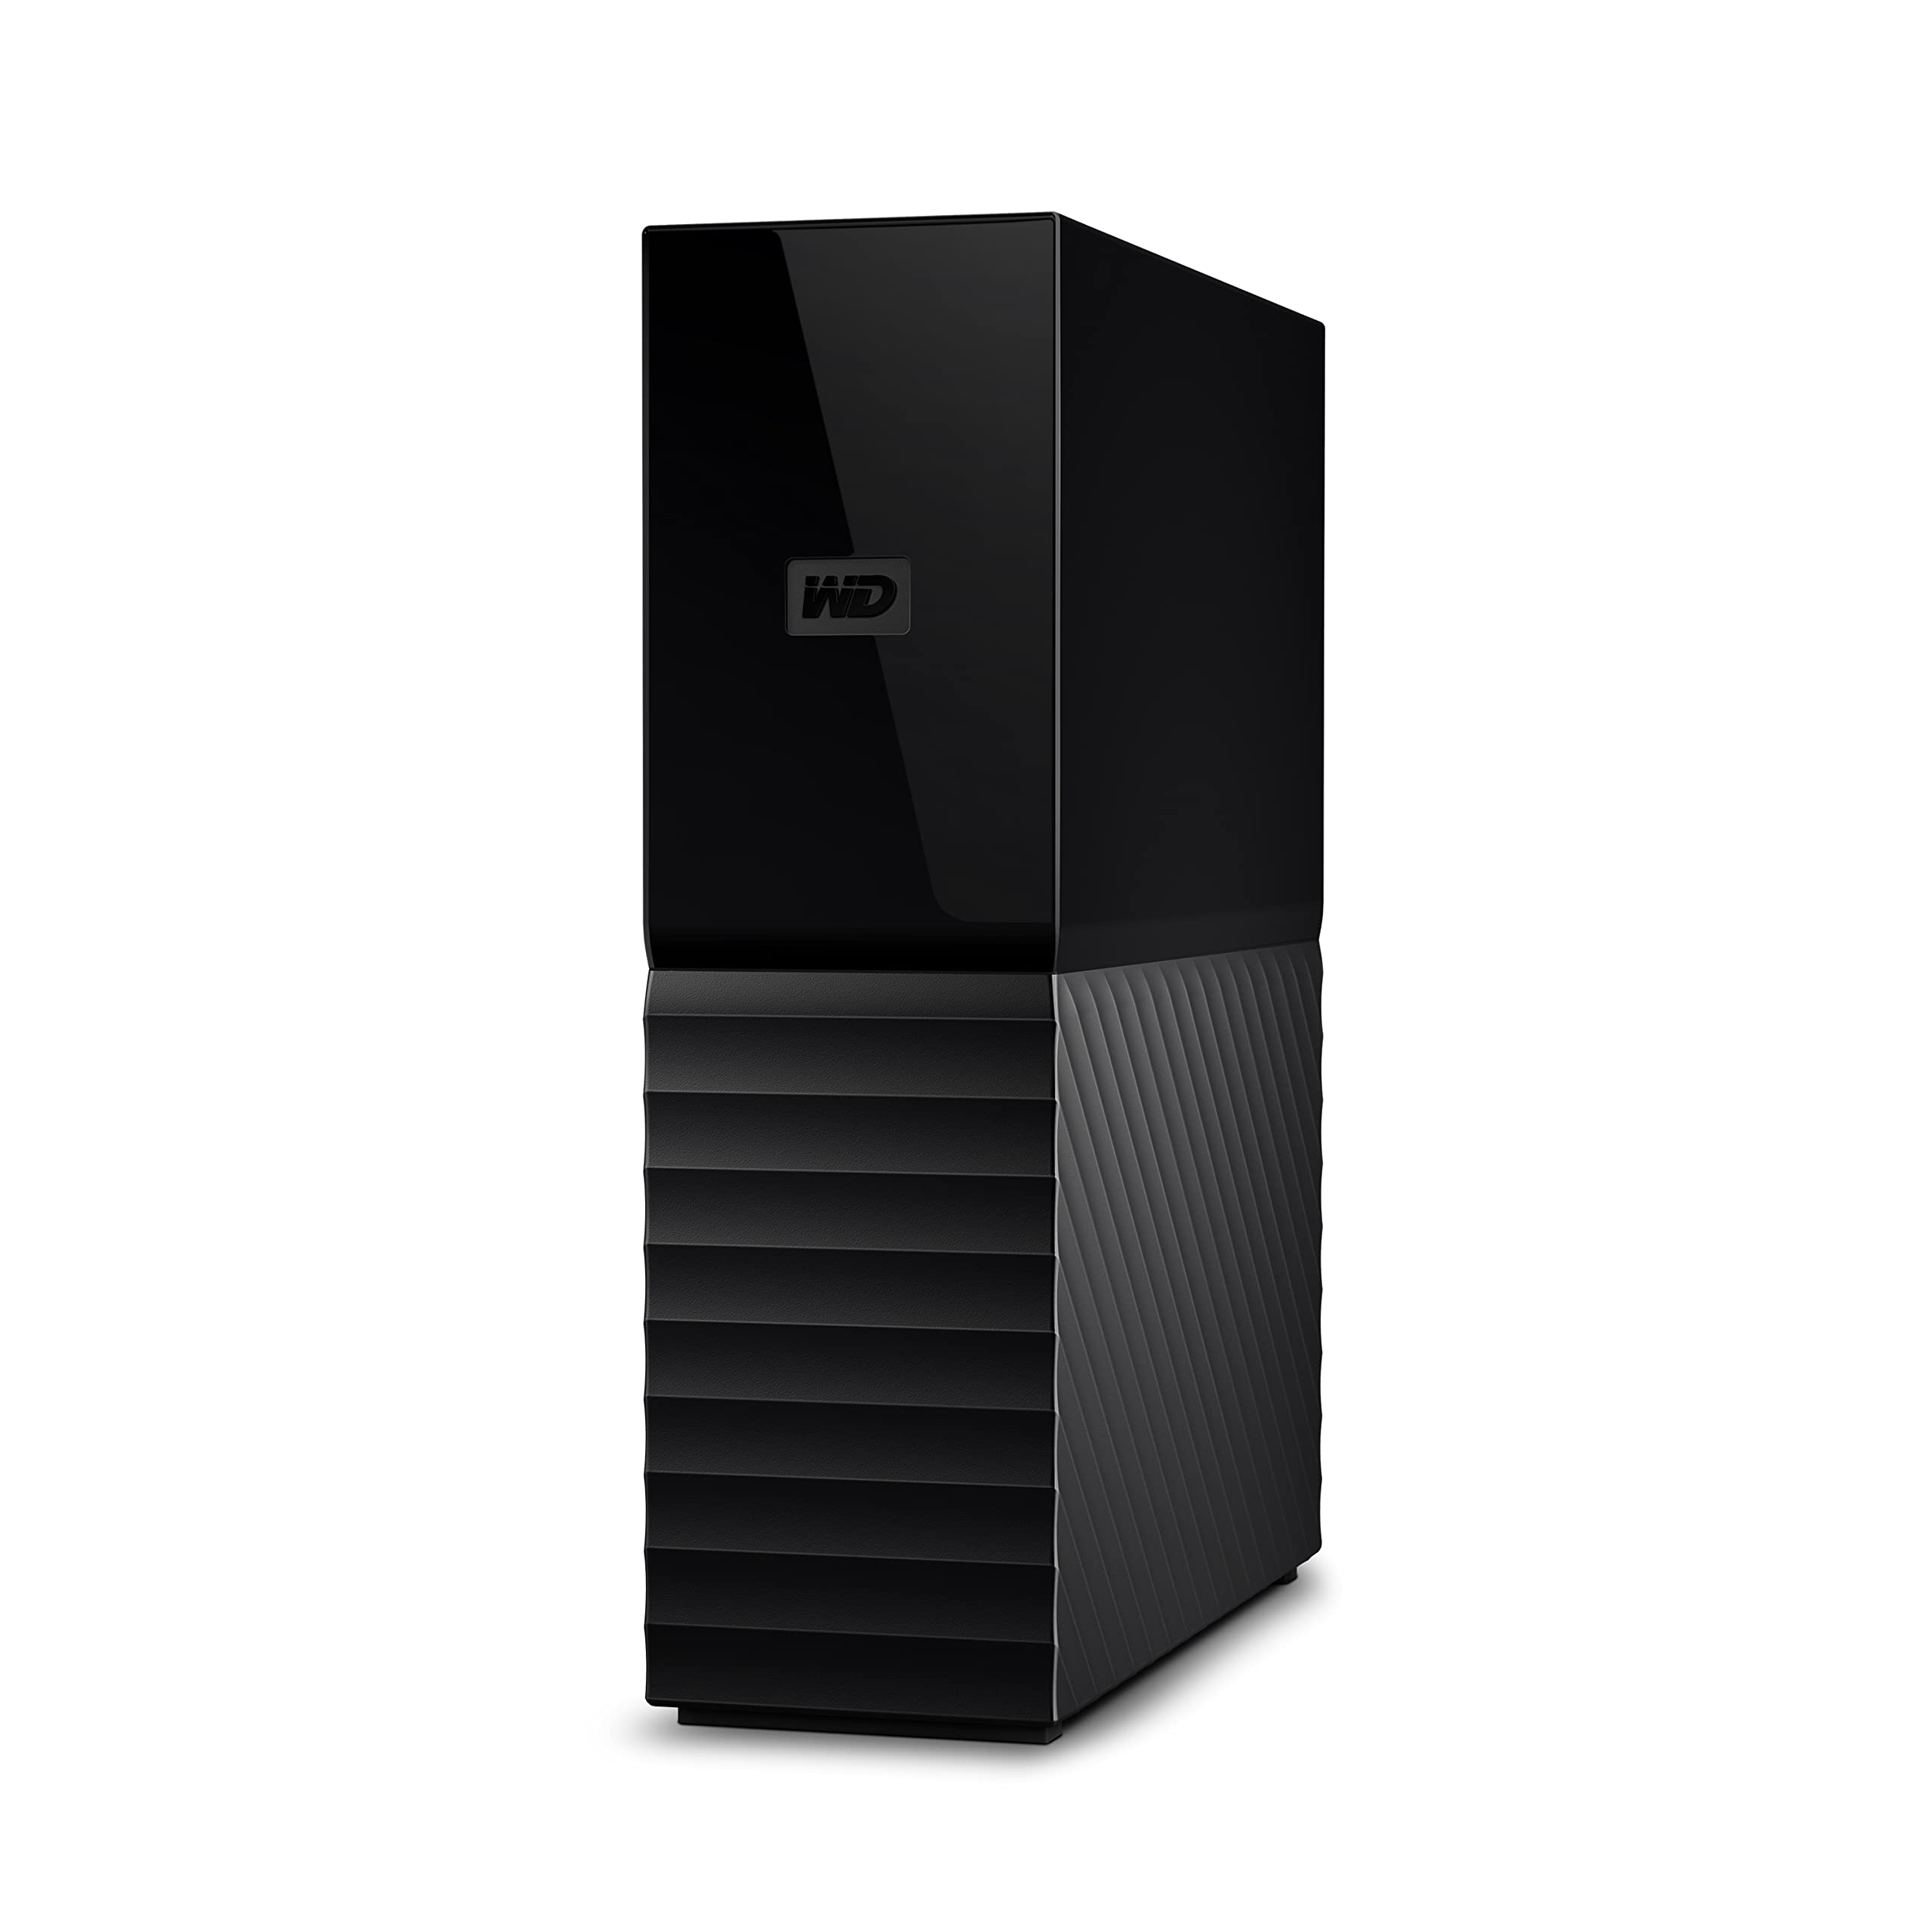 Western Digital 12 TB My Book USB 3.0 Desktop Hard Drive with Password Protection and Auto Backup Software, Black